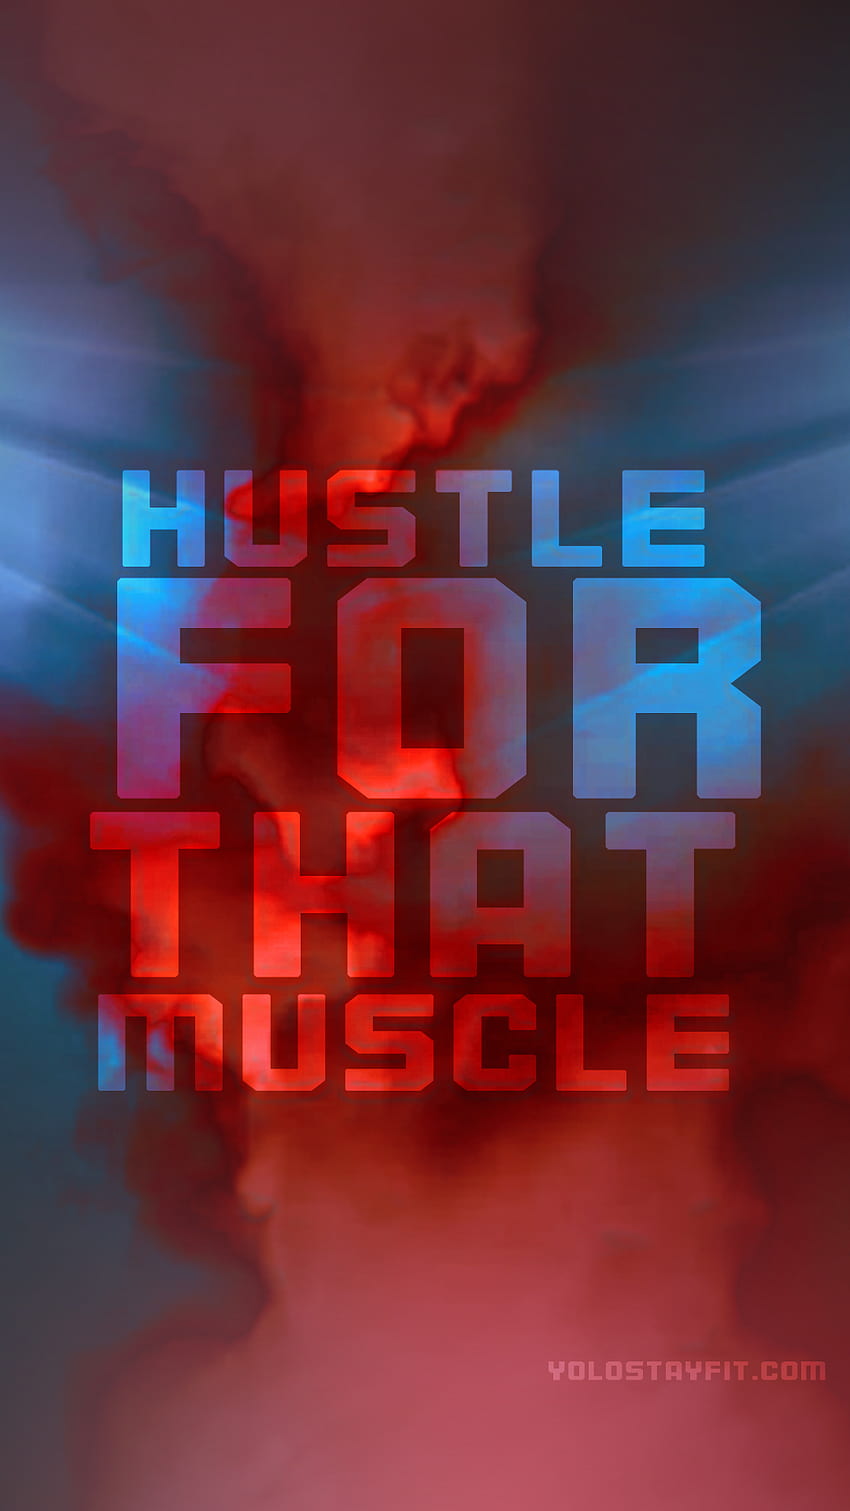 hustle for that muscle fitness quote - yolo stay fit, Beast Gym HD phone wallpaper